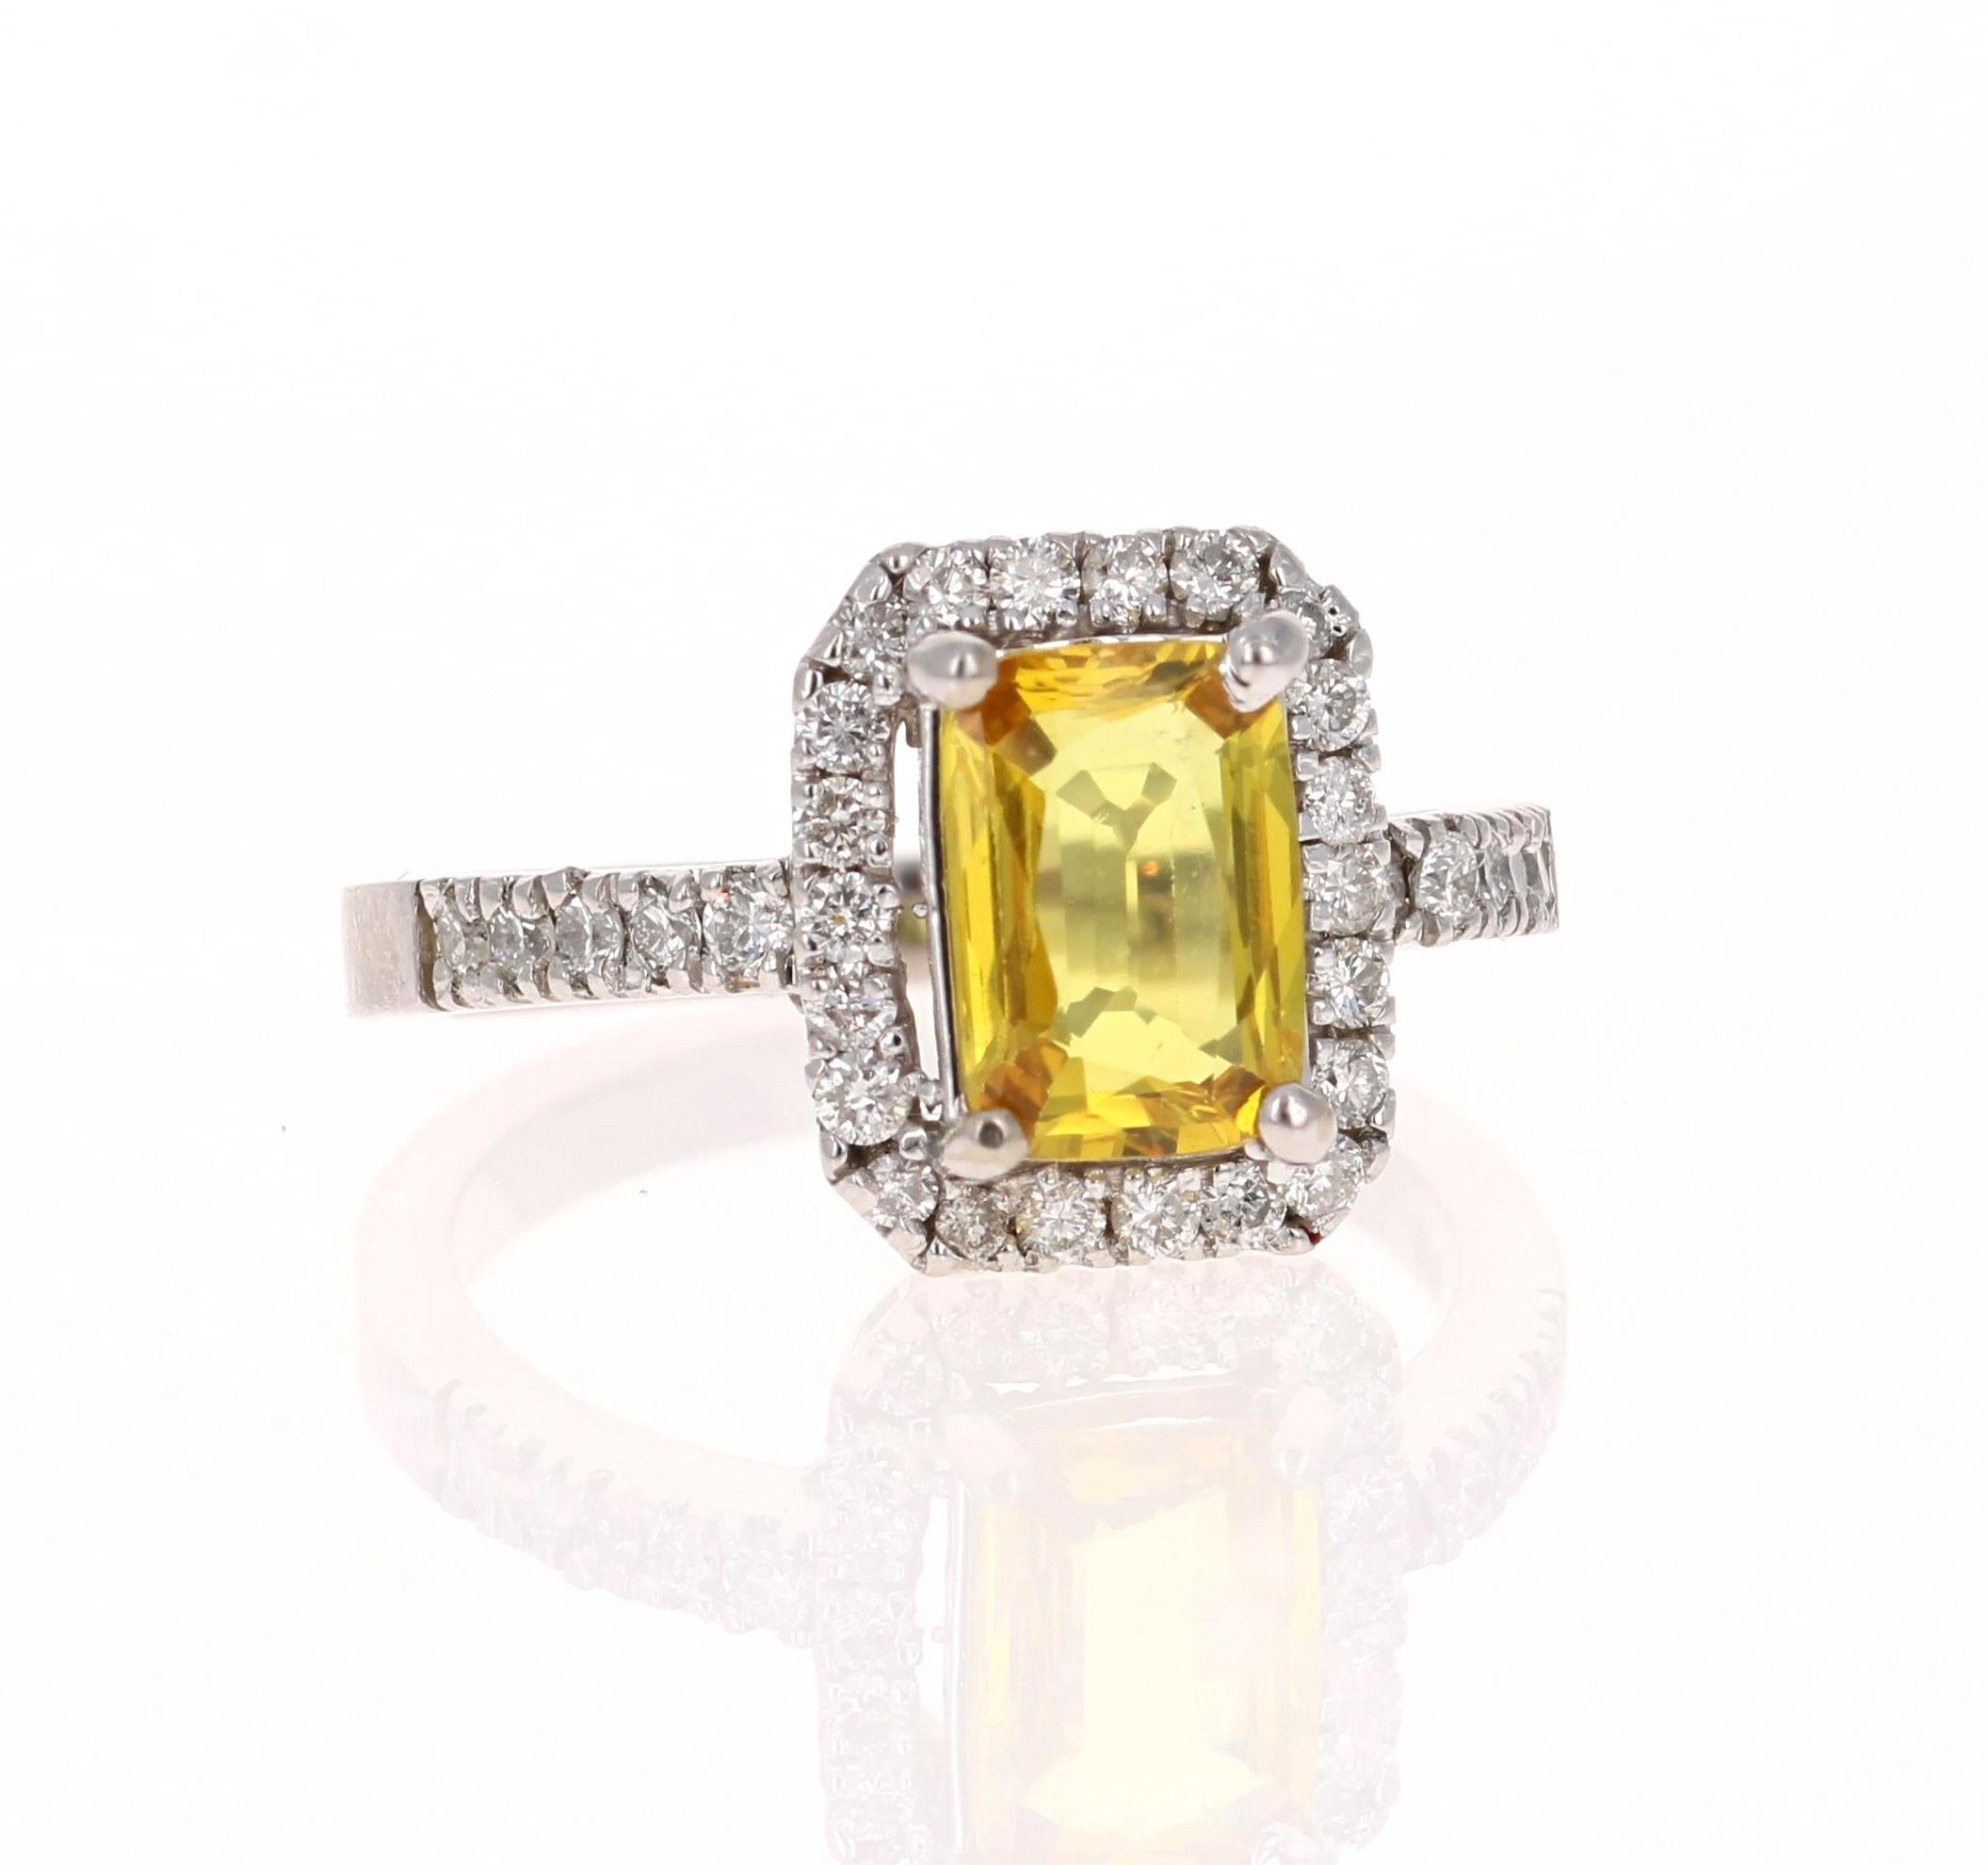 Classic Yellow Sapphire Halo Diamond Ring! 

This beautiful ring has a Emerald Cut Yellow Sapphire that weighs 1.81 Carats. It has a Halo of 34 Round Cut Diamonds that weigh 0.59 Carats. (Clarity: SI, Color: F)

The ring is beautifully set in 14K